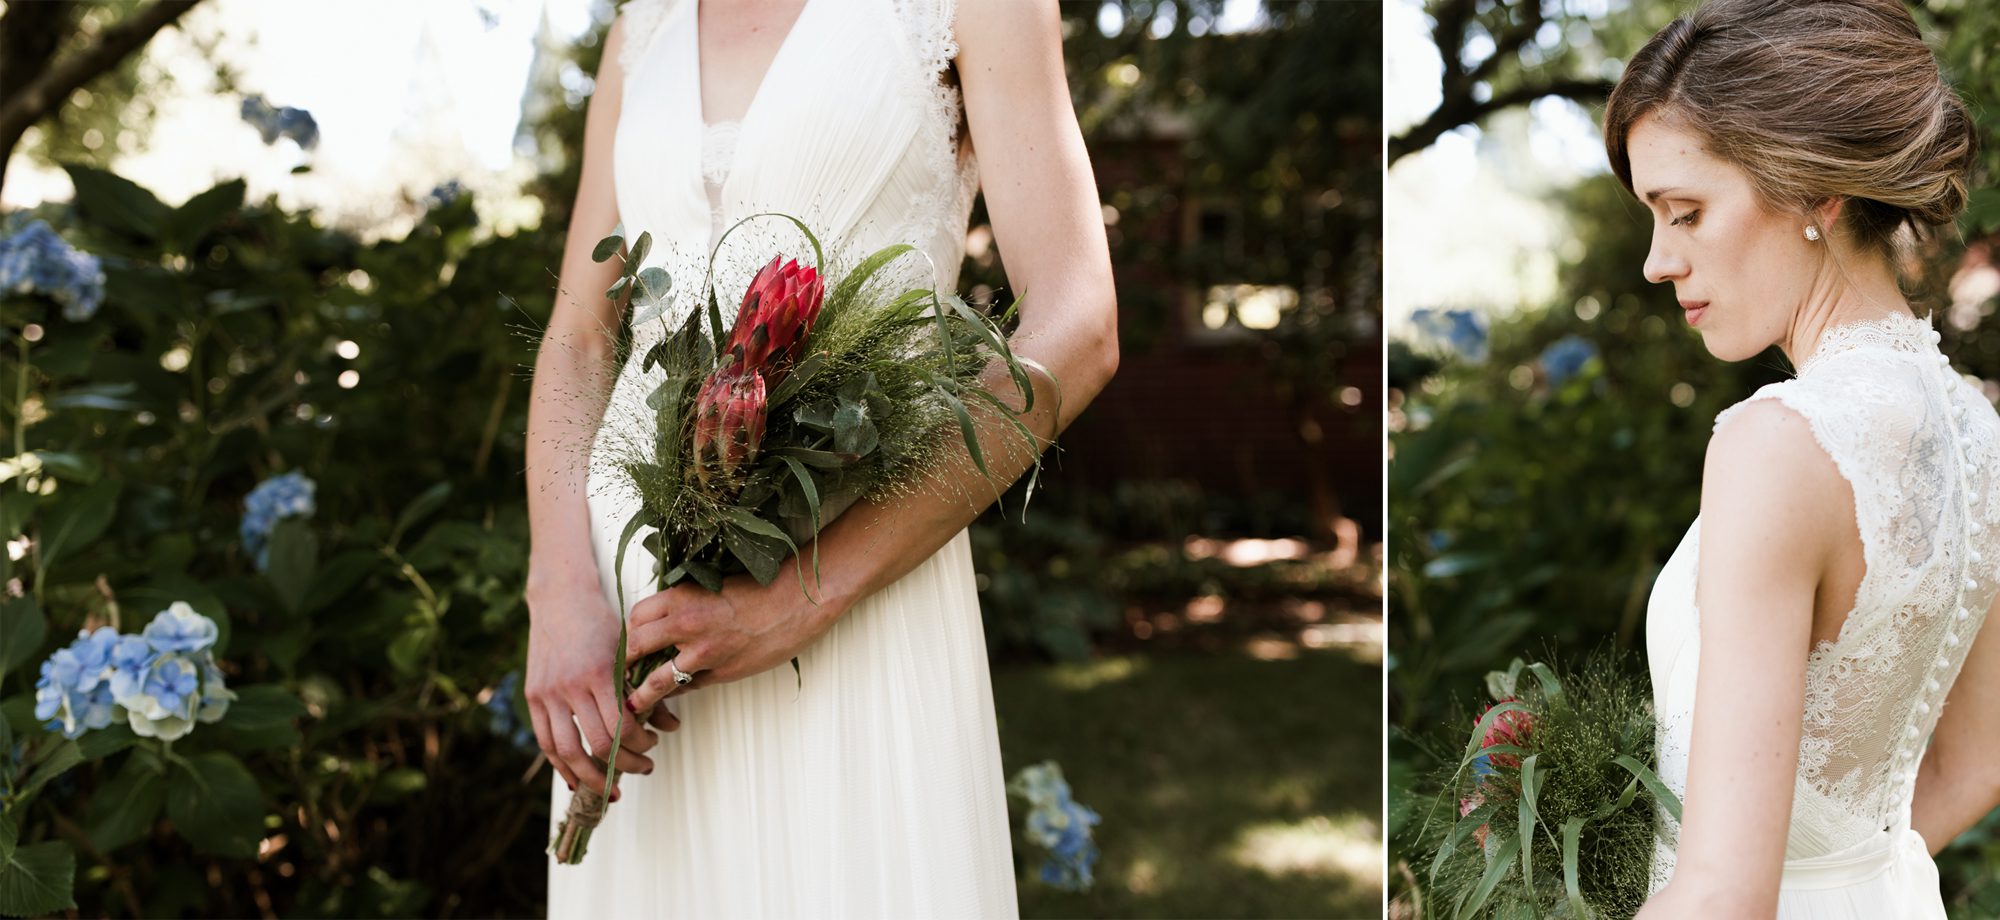 Details of the beautiful bride before the wedding ceremony. By Laurelhurst Park wedding photographer Briana Morrison